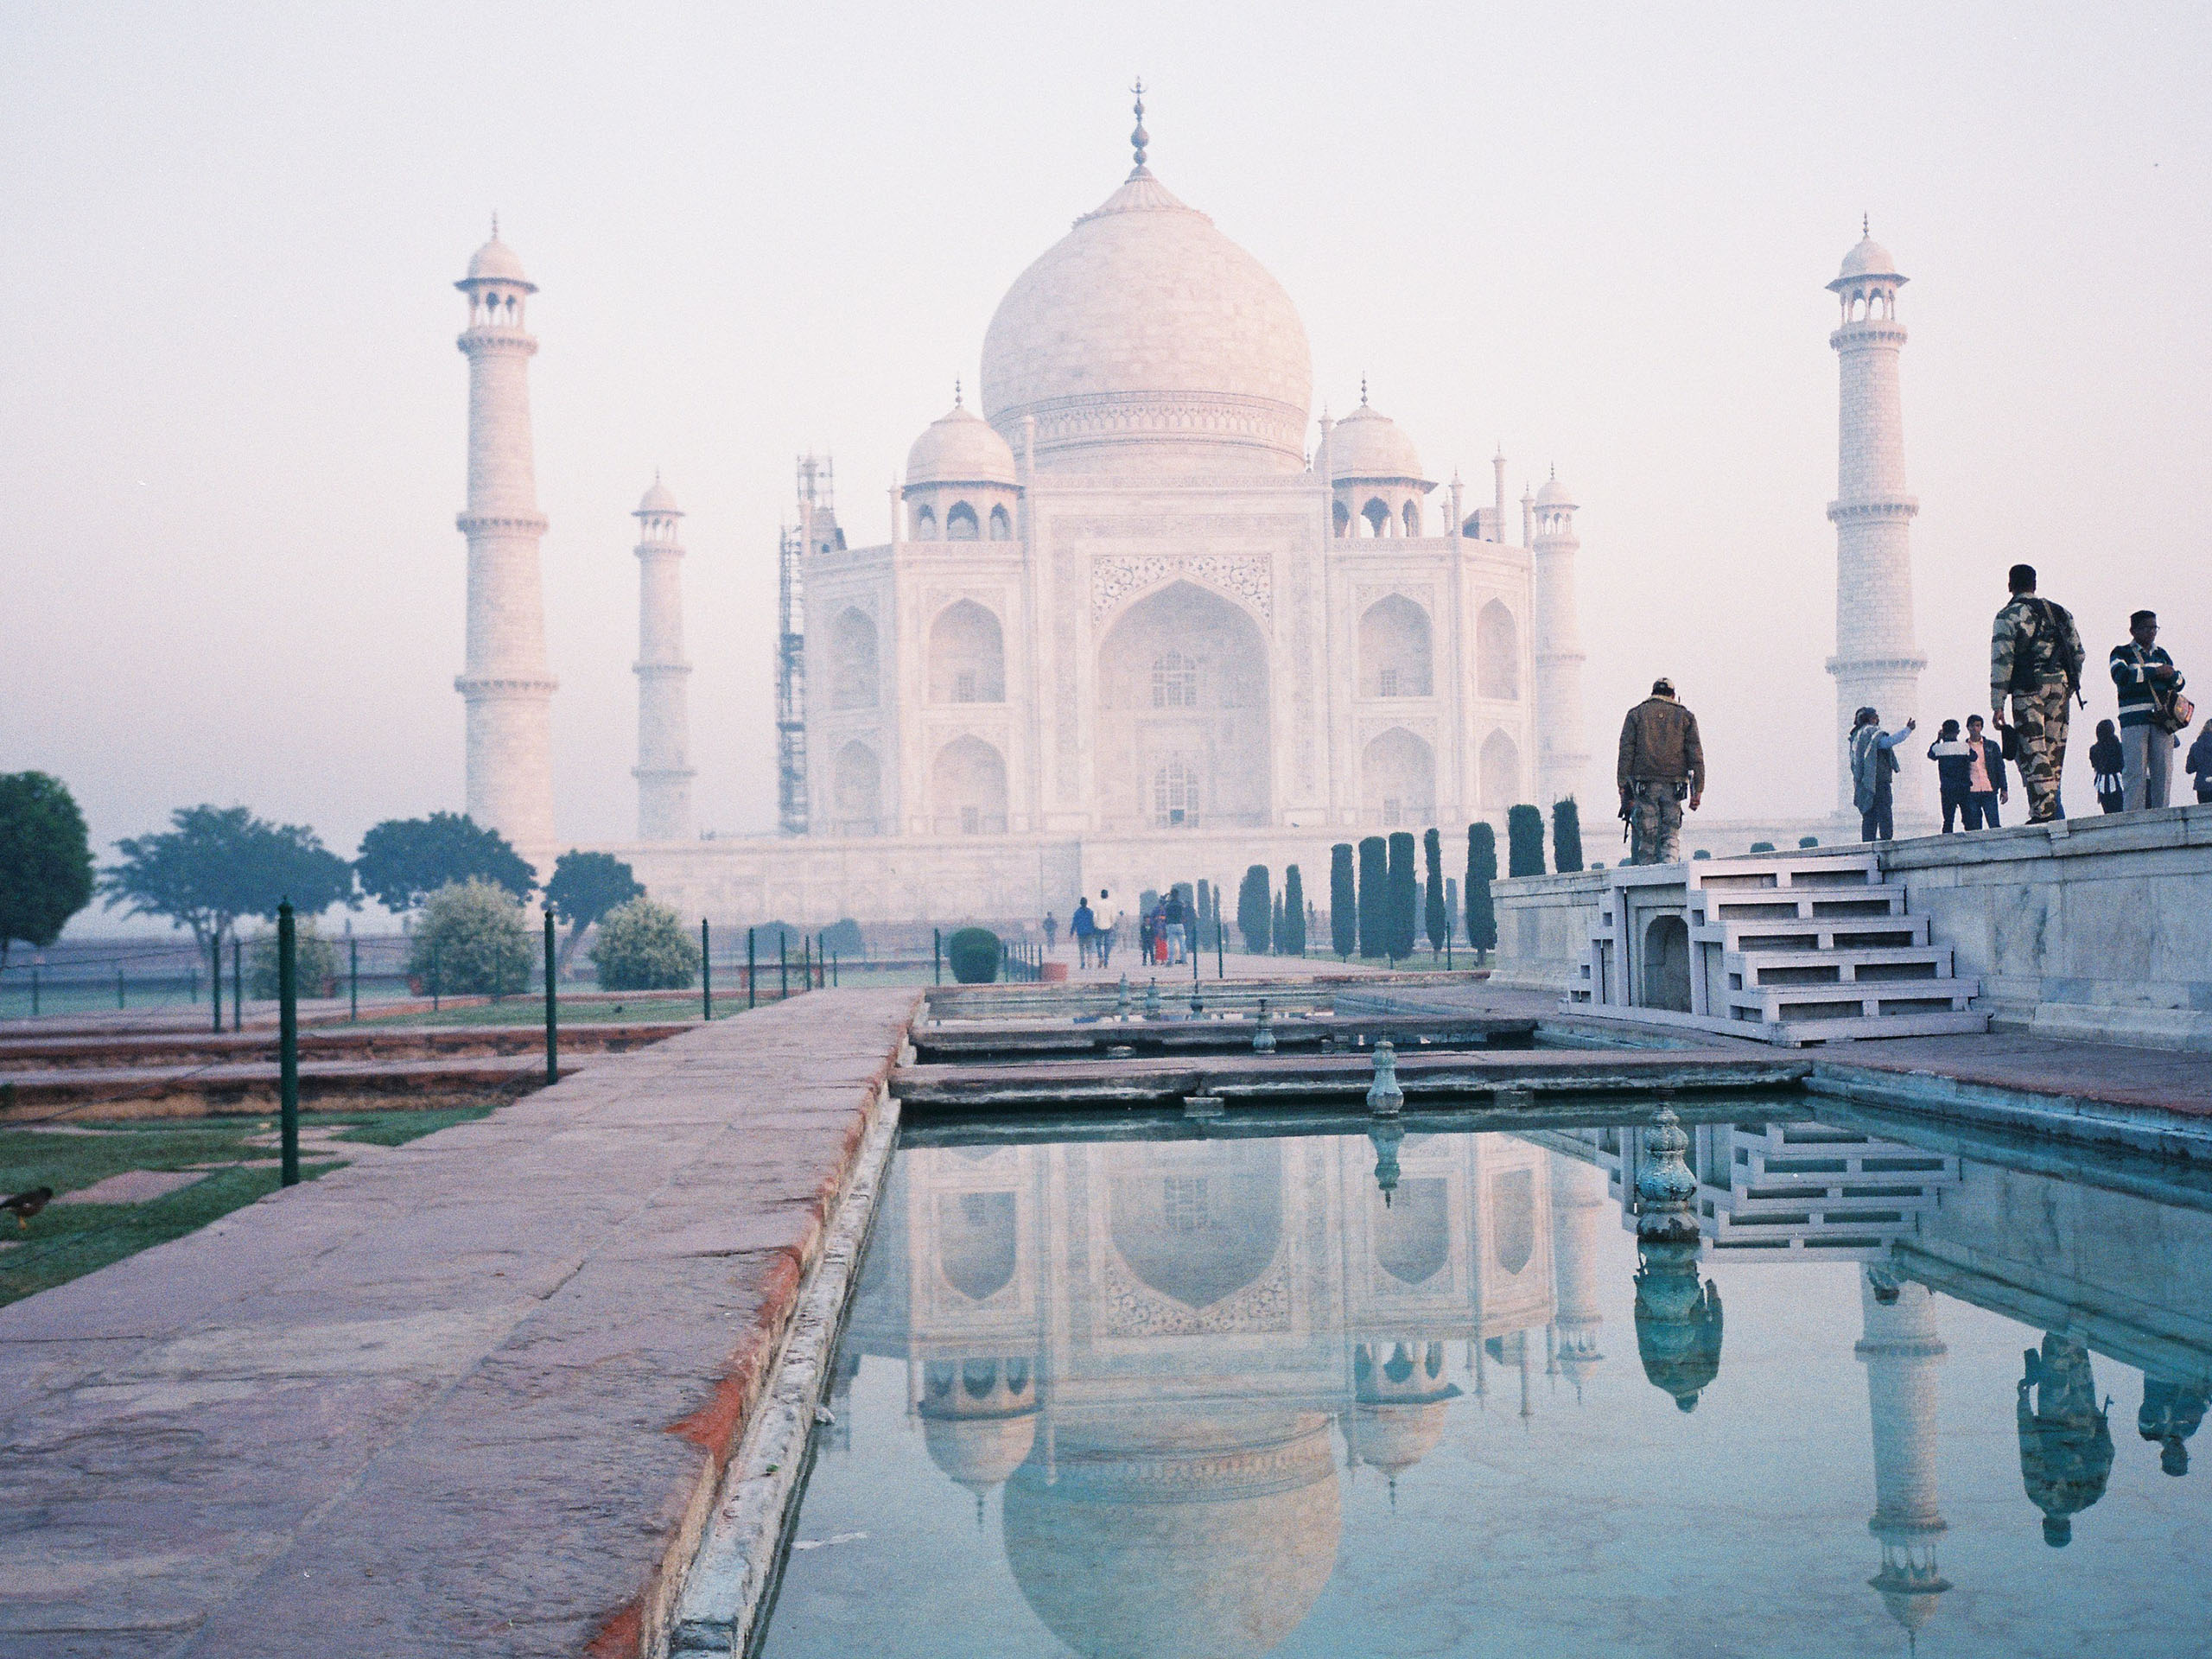 Taj Mahal - the architectural masterpiece and its sleek white marble walls